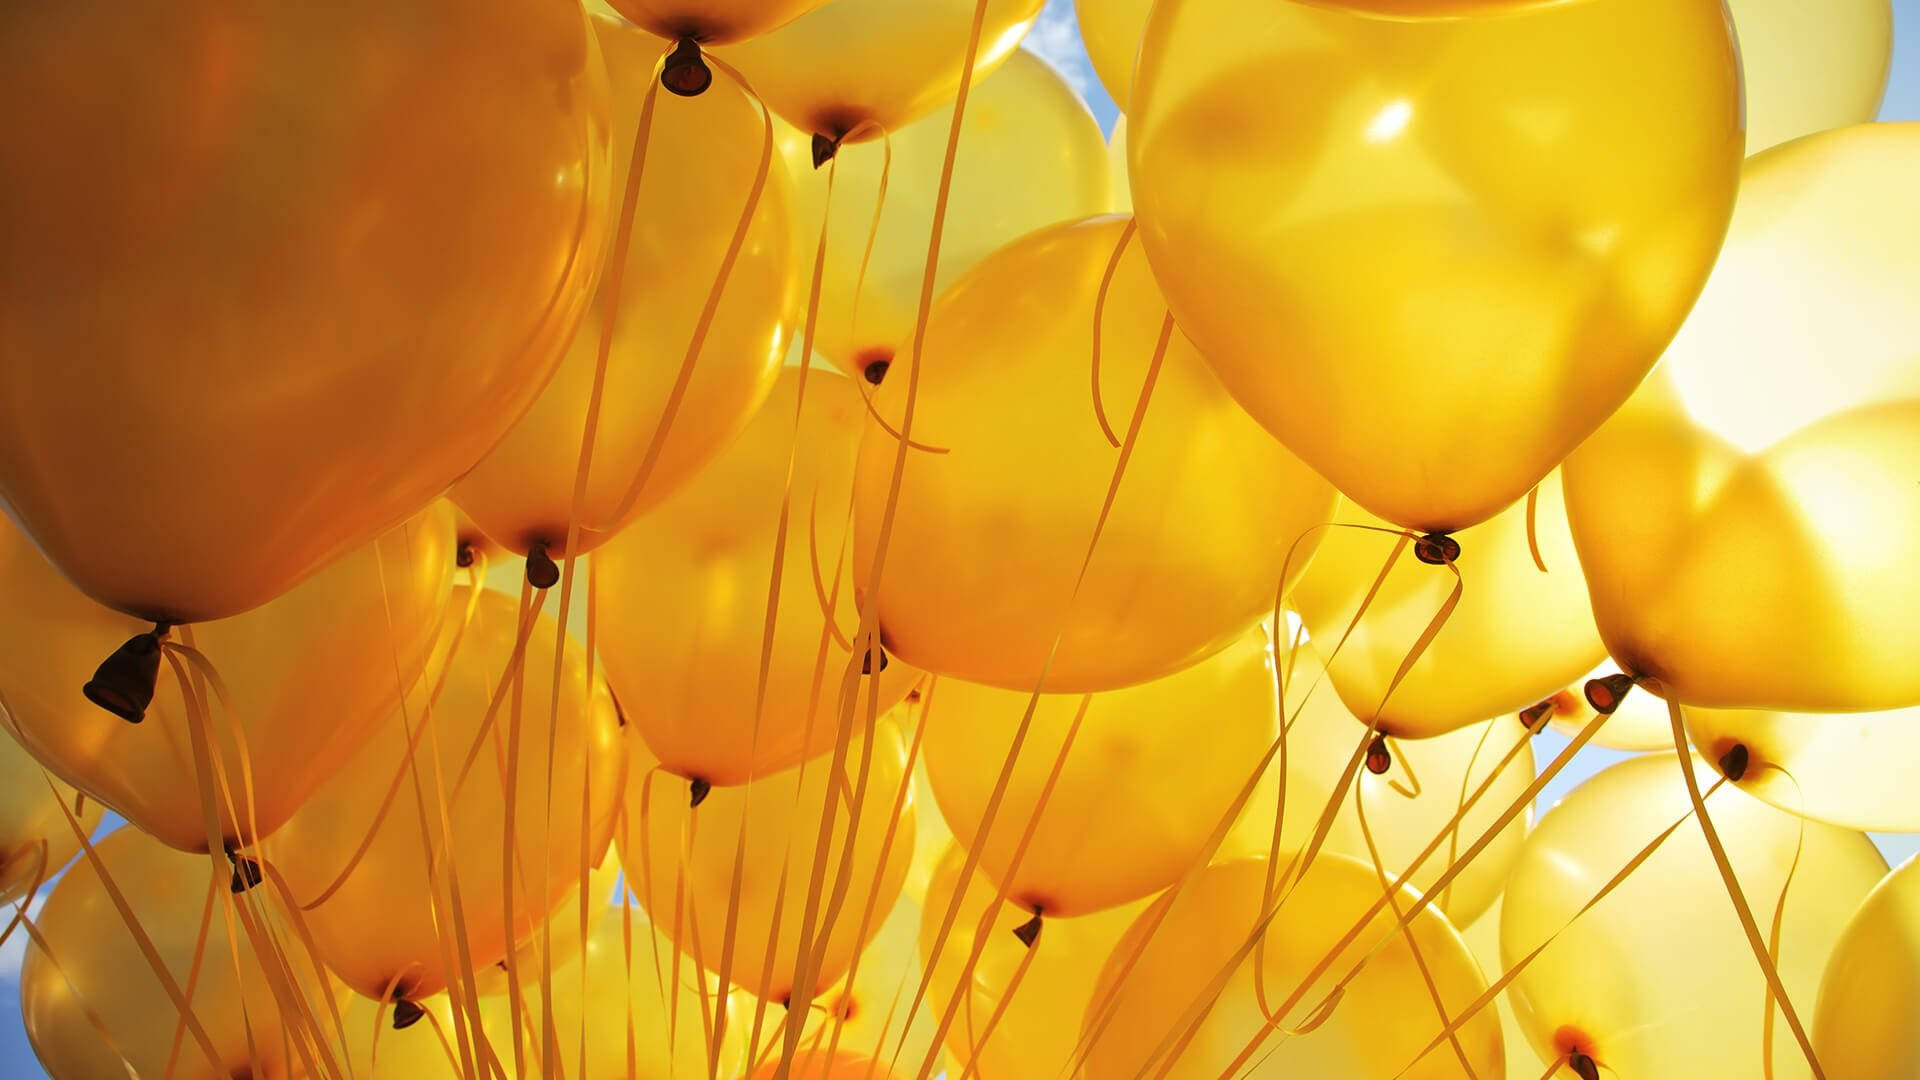 Glossy Pastel Yellow Balloons Background